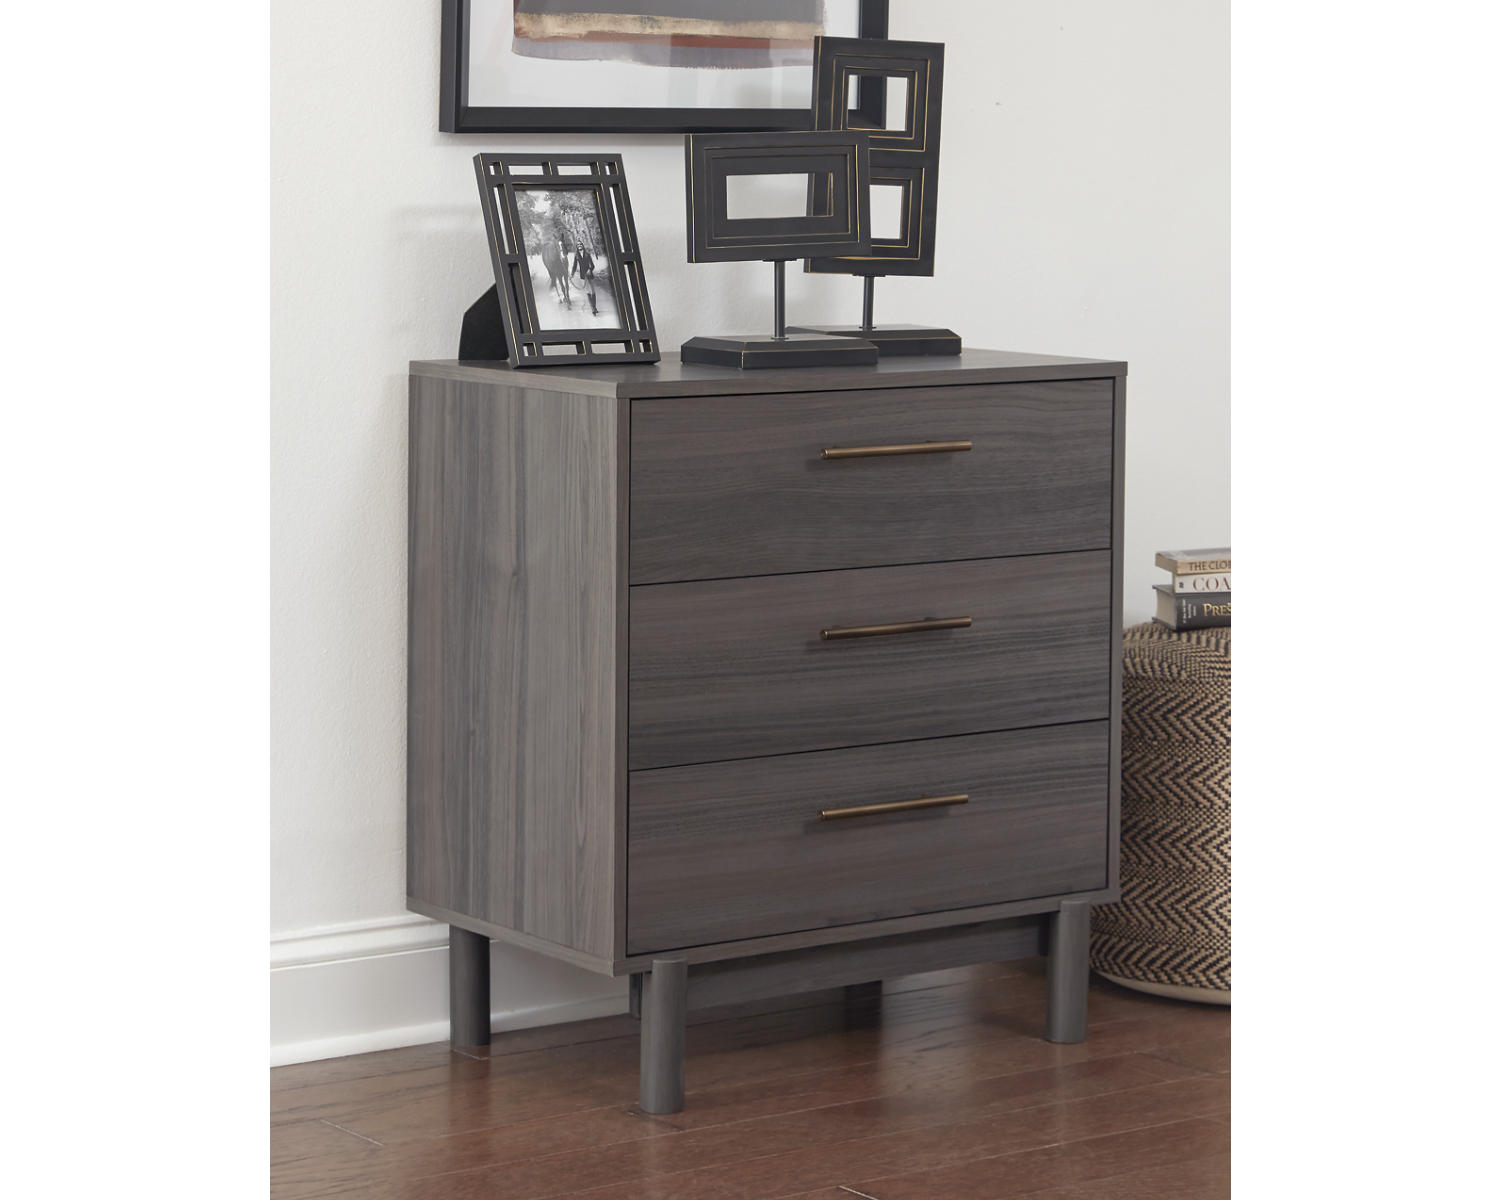 Signature Design by Ashley Brymont Mid-Century Modern 3 Drawer Chest of Drawers, Dark Gray - image 2 of 6